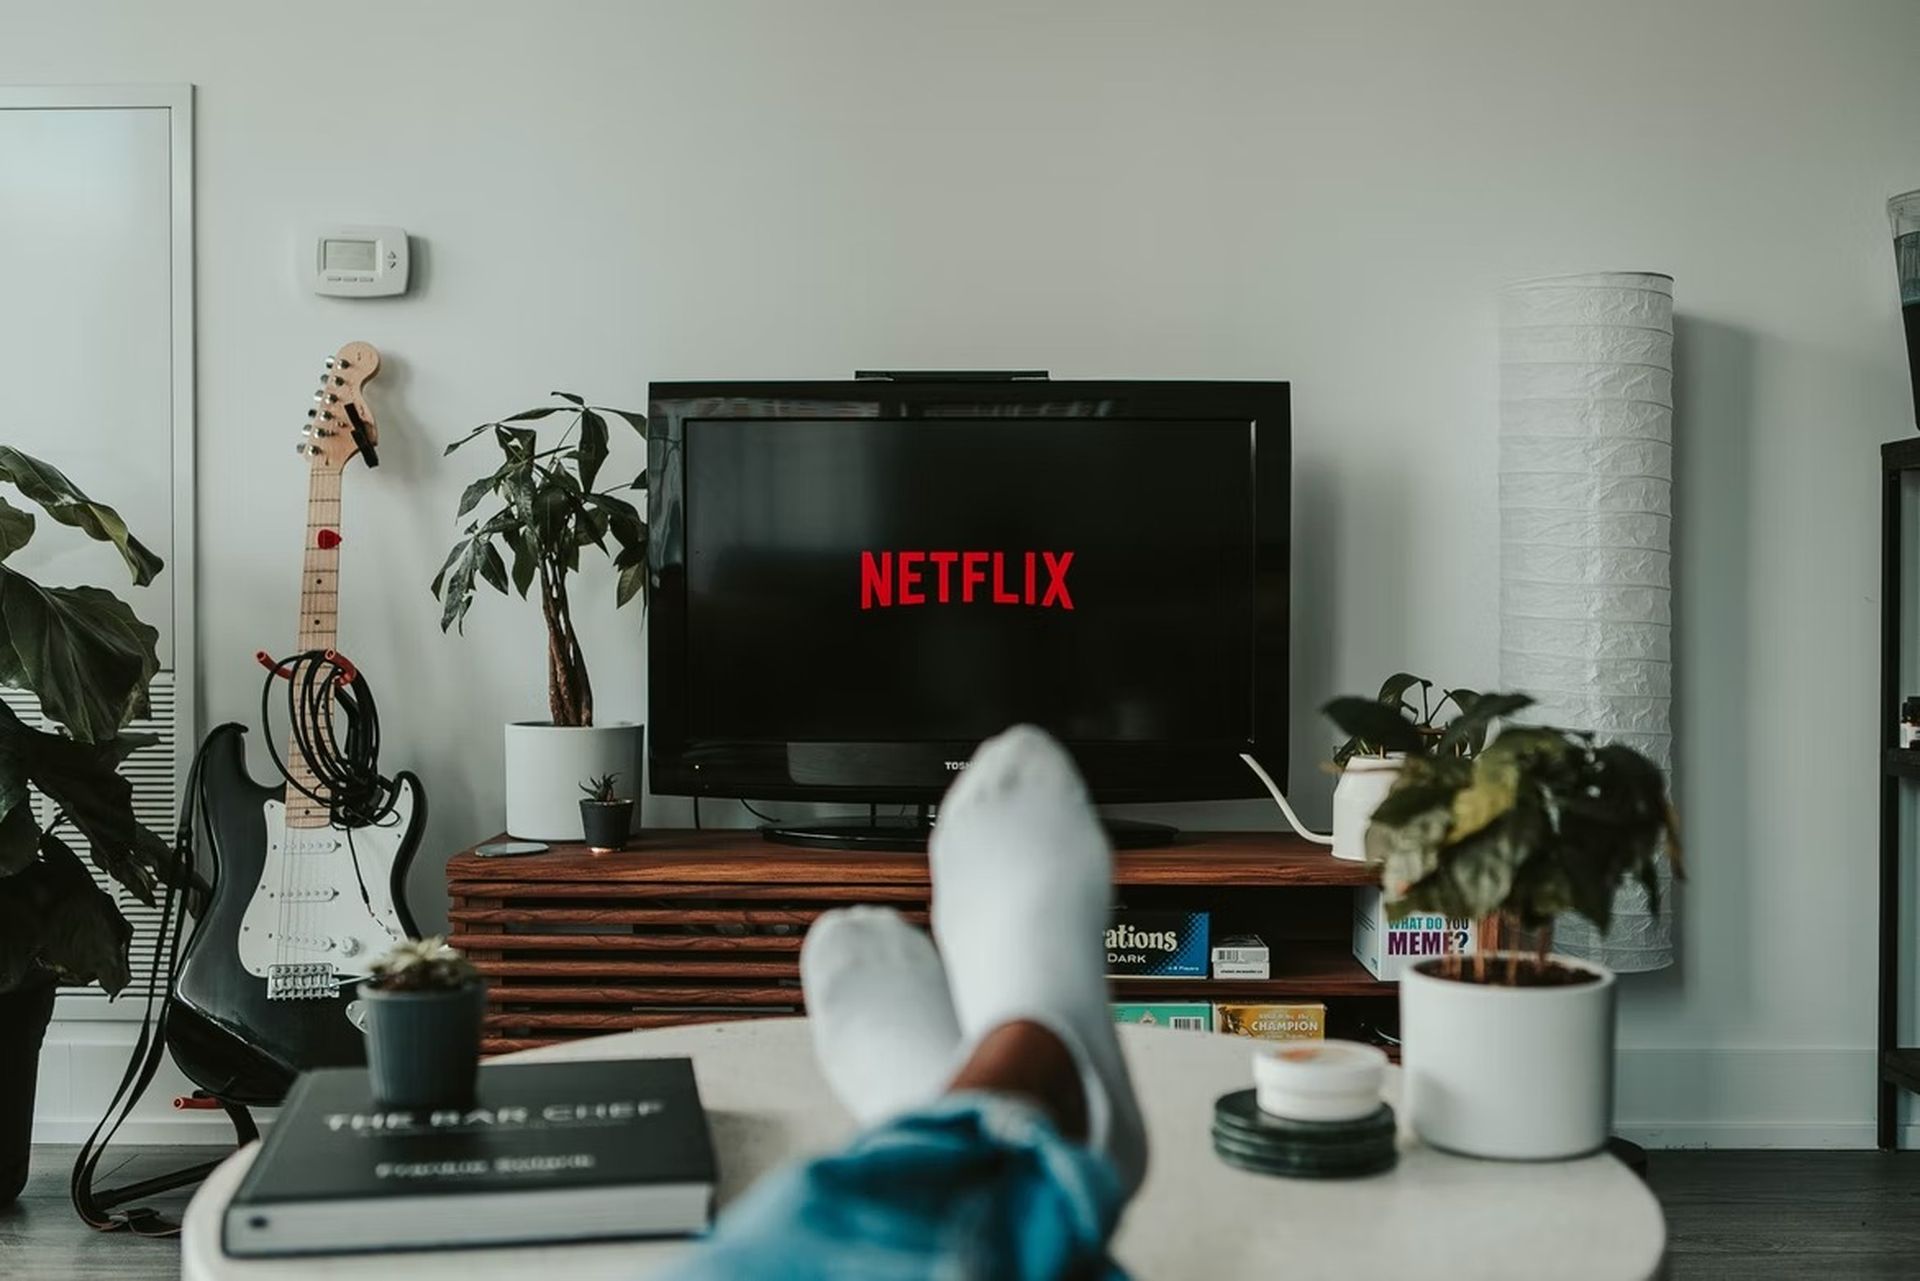 If you don't know how to connect mobile to TV, we are here to help. You're all ready to 